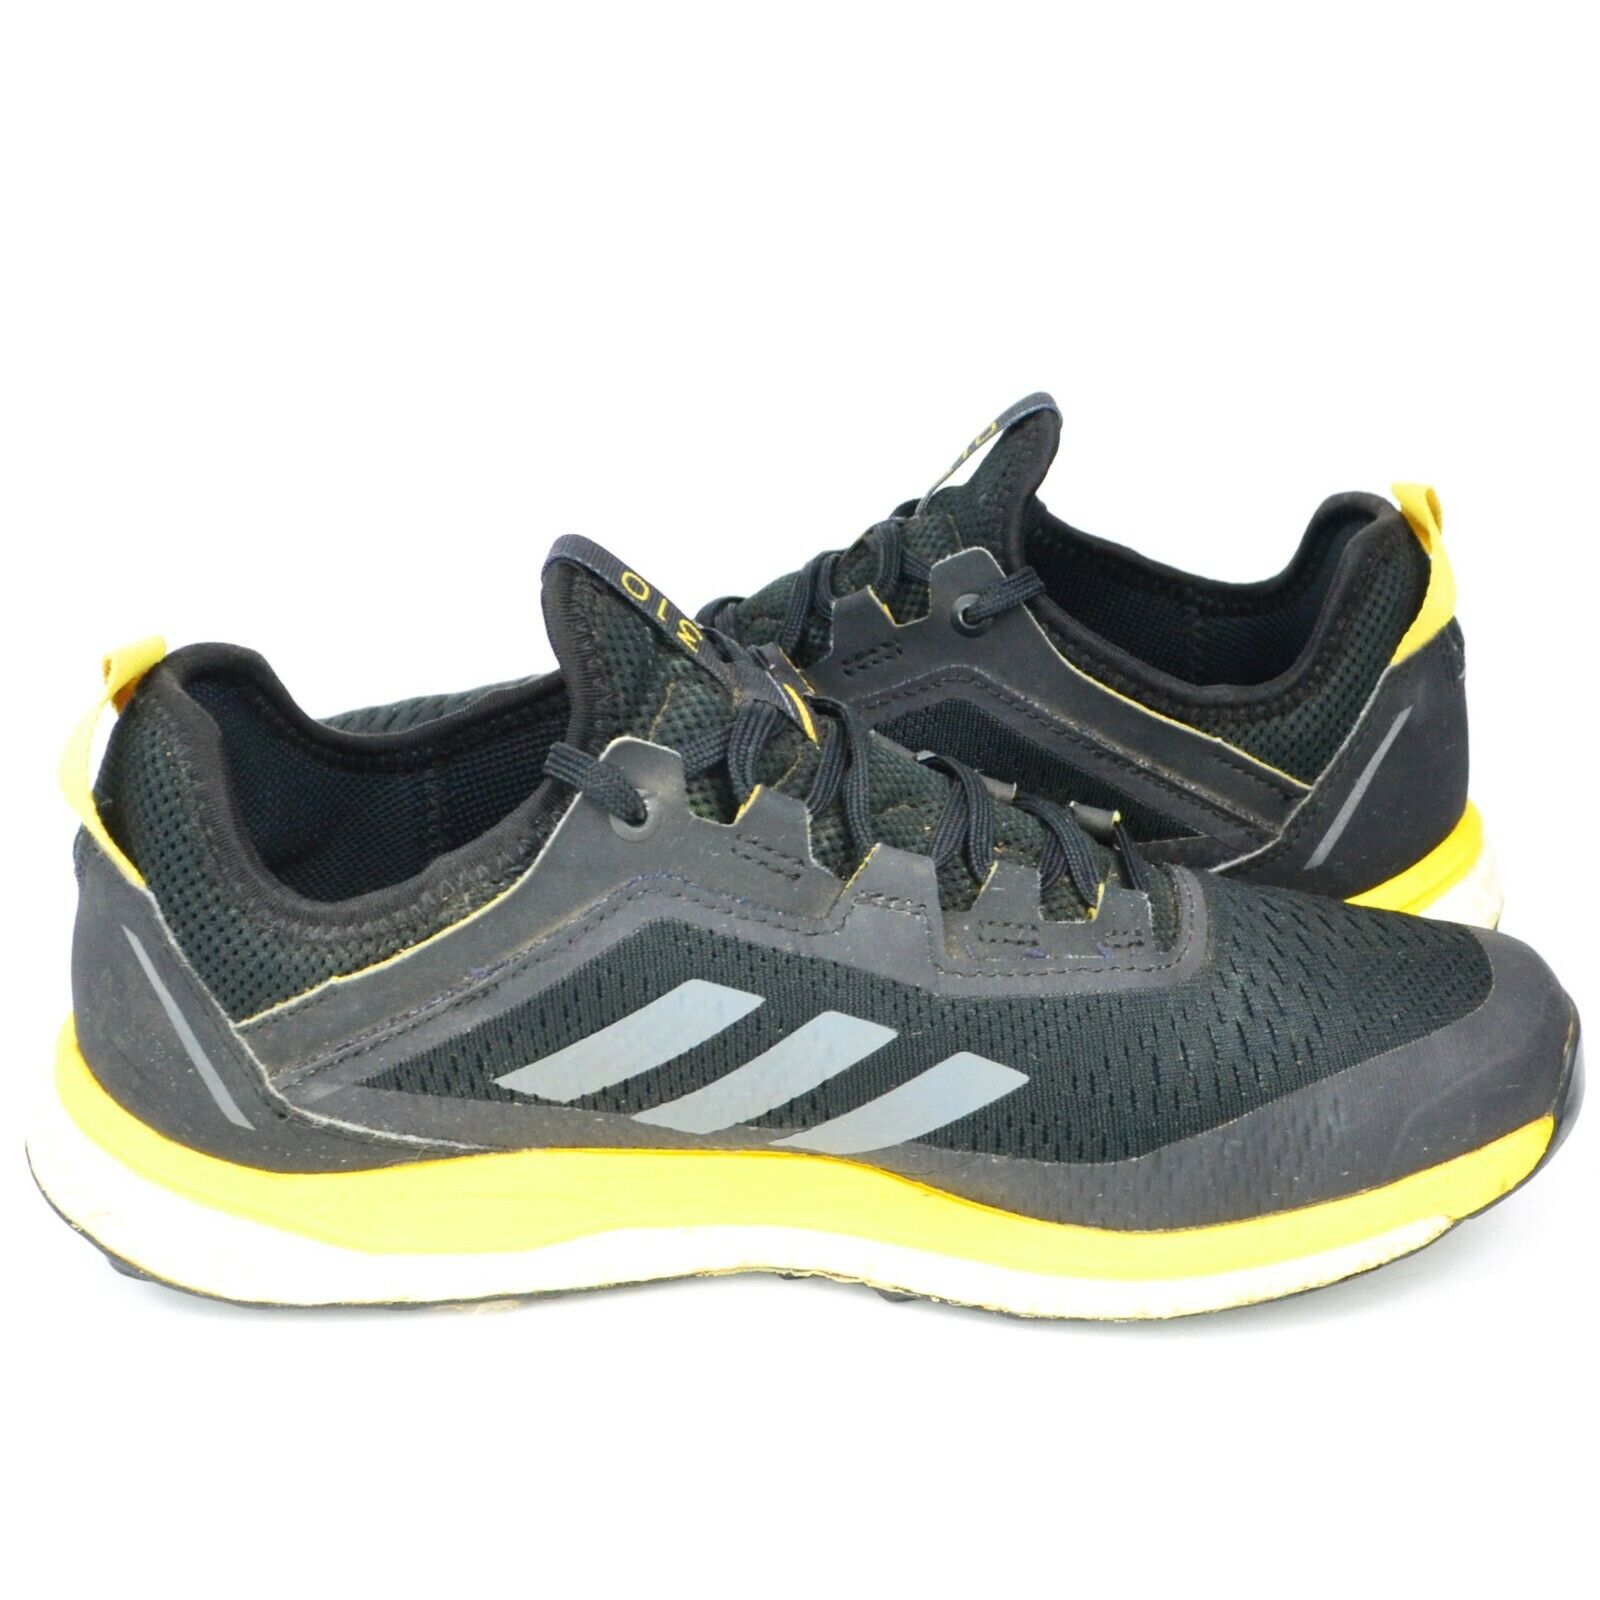 cooperate practitioner Shah Adidas Agravic Flow 310 Terrex Men's Size 8 Black Yellow Trail Running  Shoes | eBay